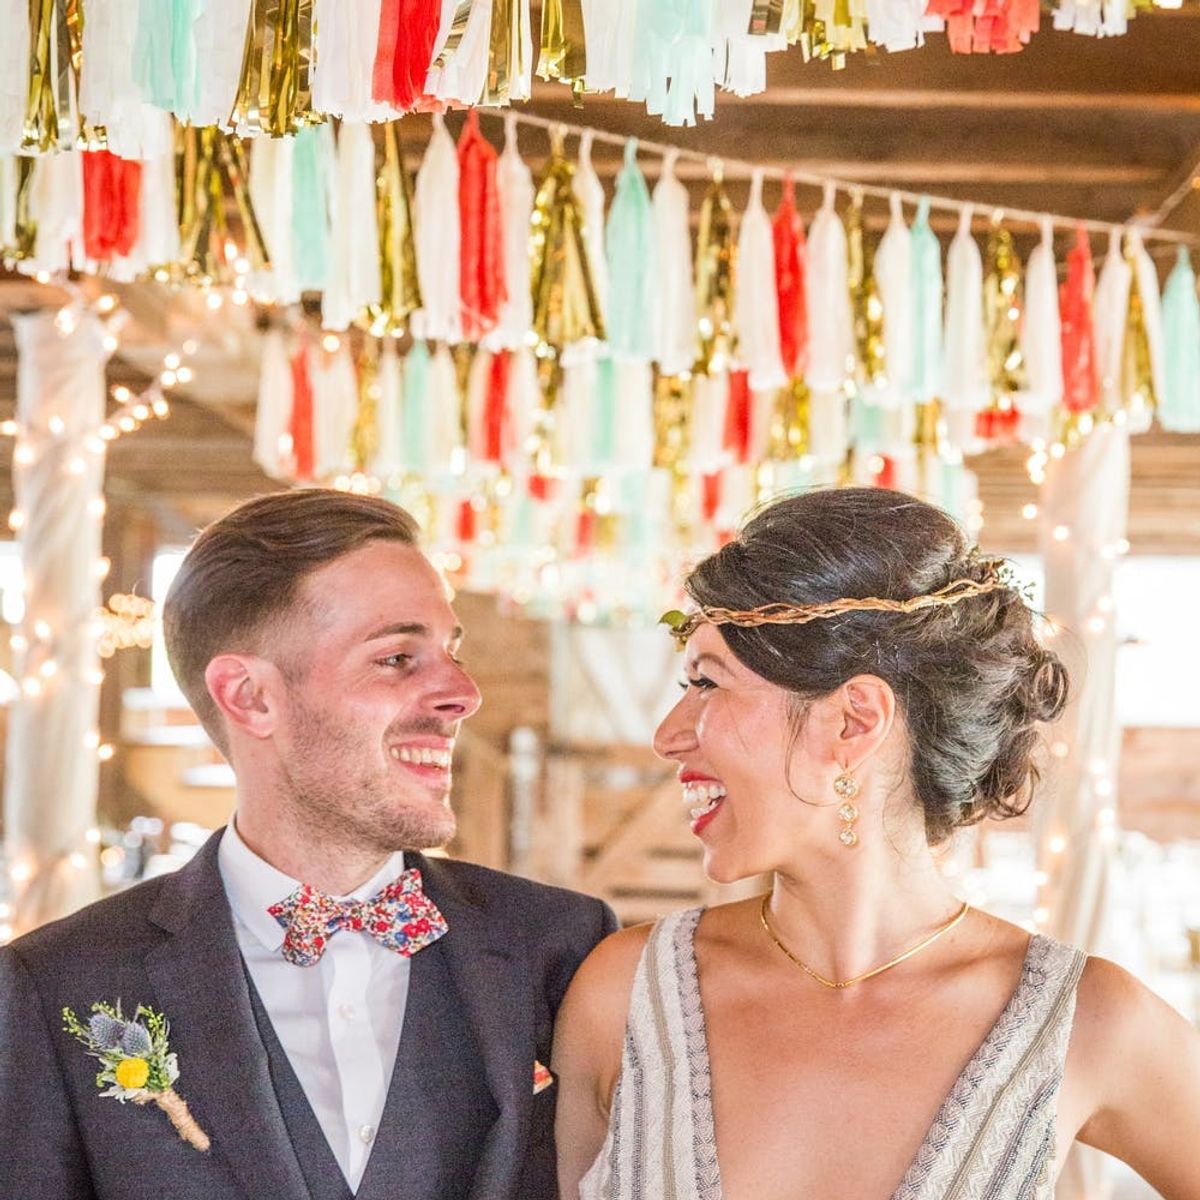 This Colorful Boho Barn Wedding Brings New Life to a Rustic Venue